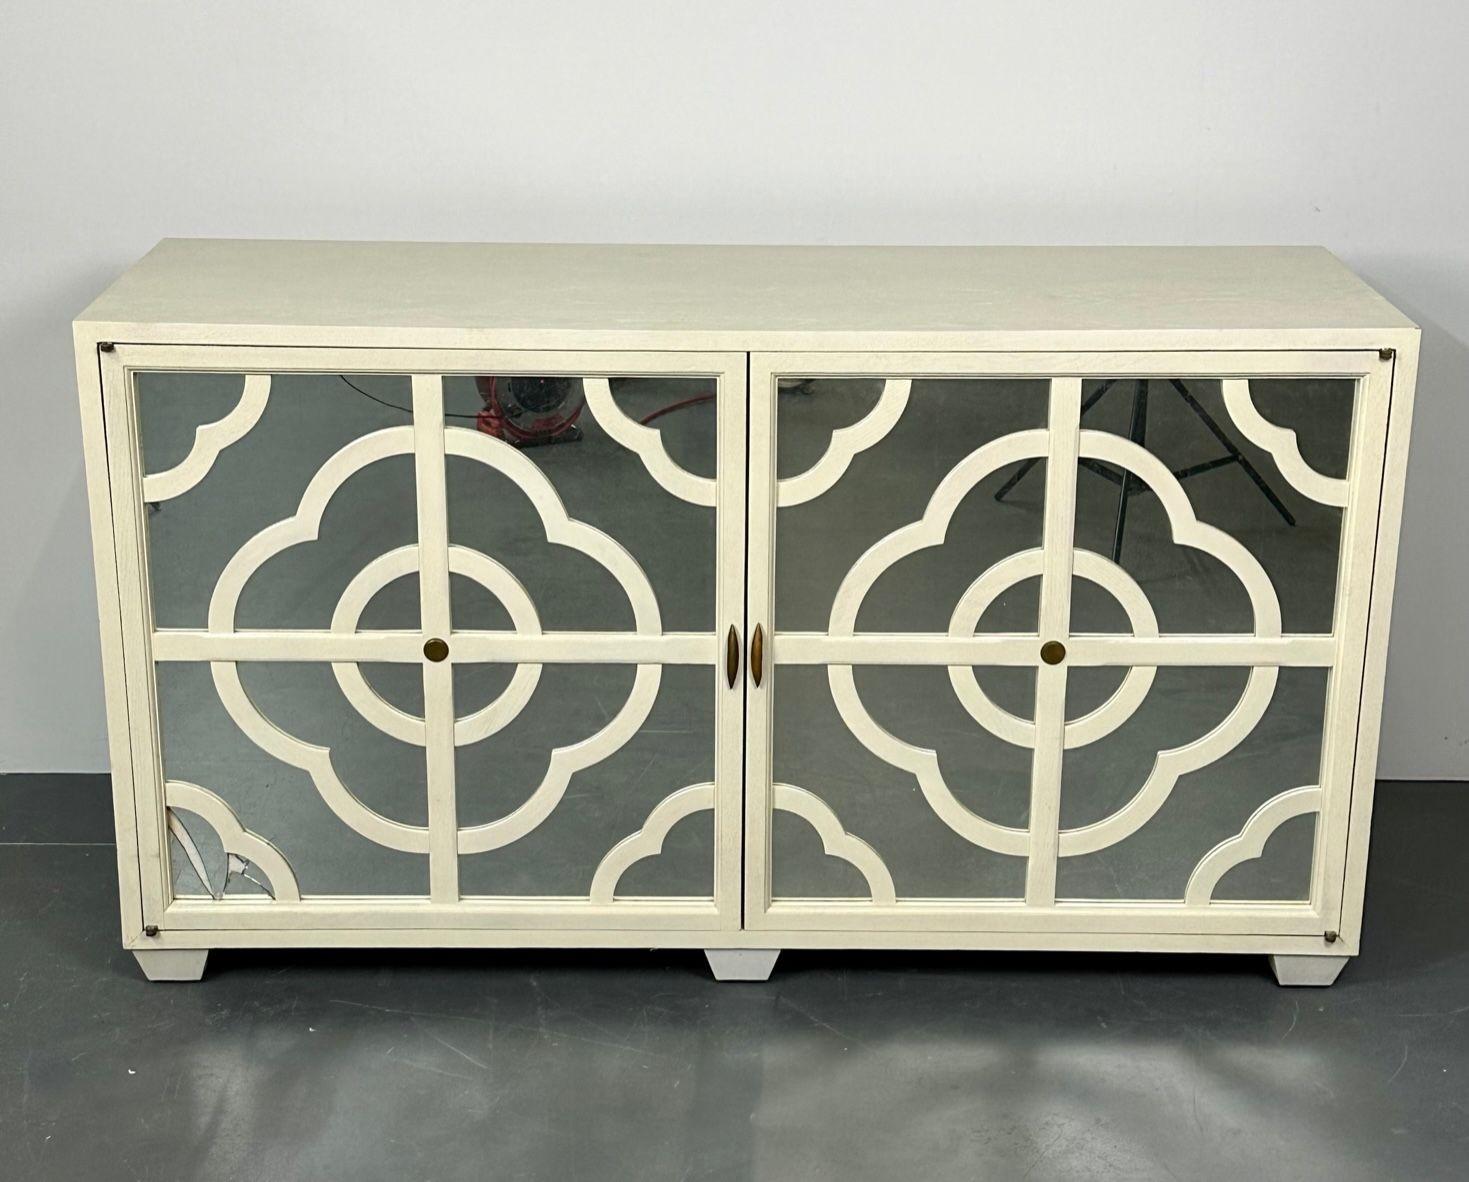 Modern white Decorative mirrored cabinet / Credenza / dresser, American design
A Newly manufactured cabinet or credenza in a satin white painted and mirror finish. The case having two doors that swing open with mirrored fronts and a unique wooded